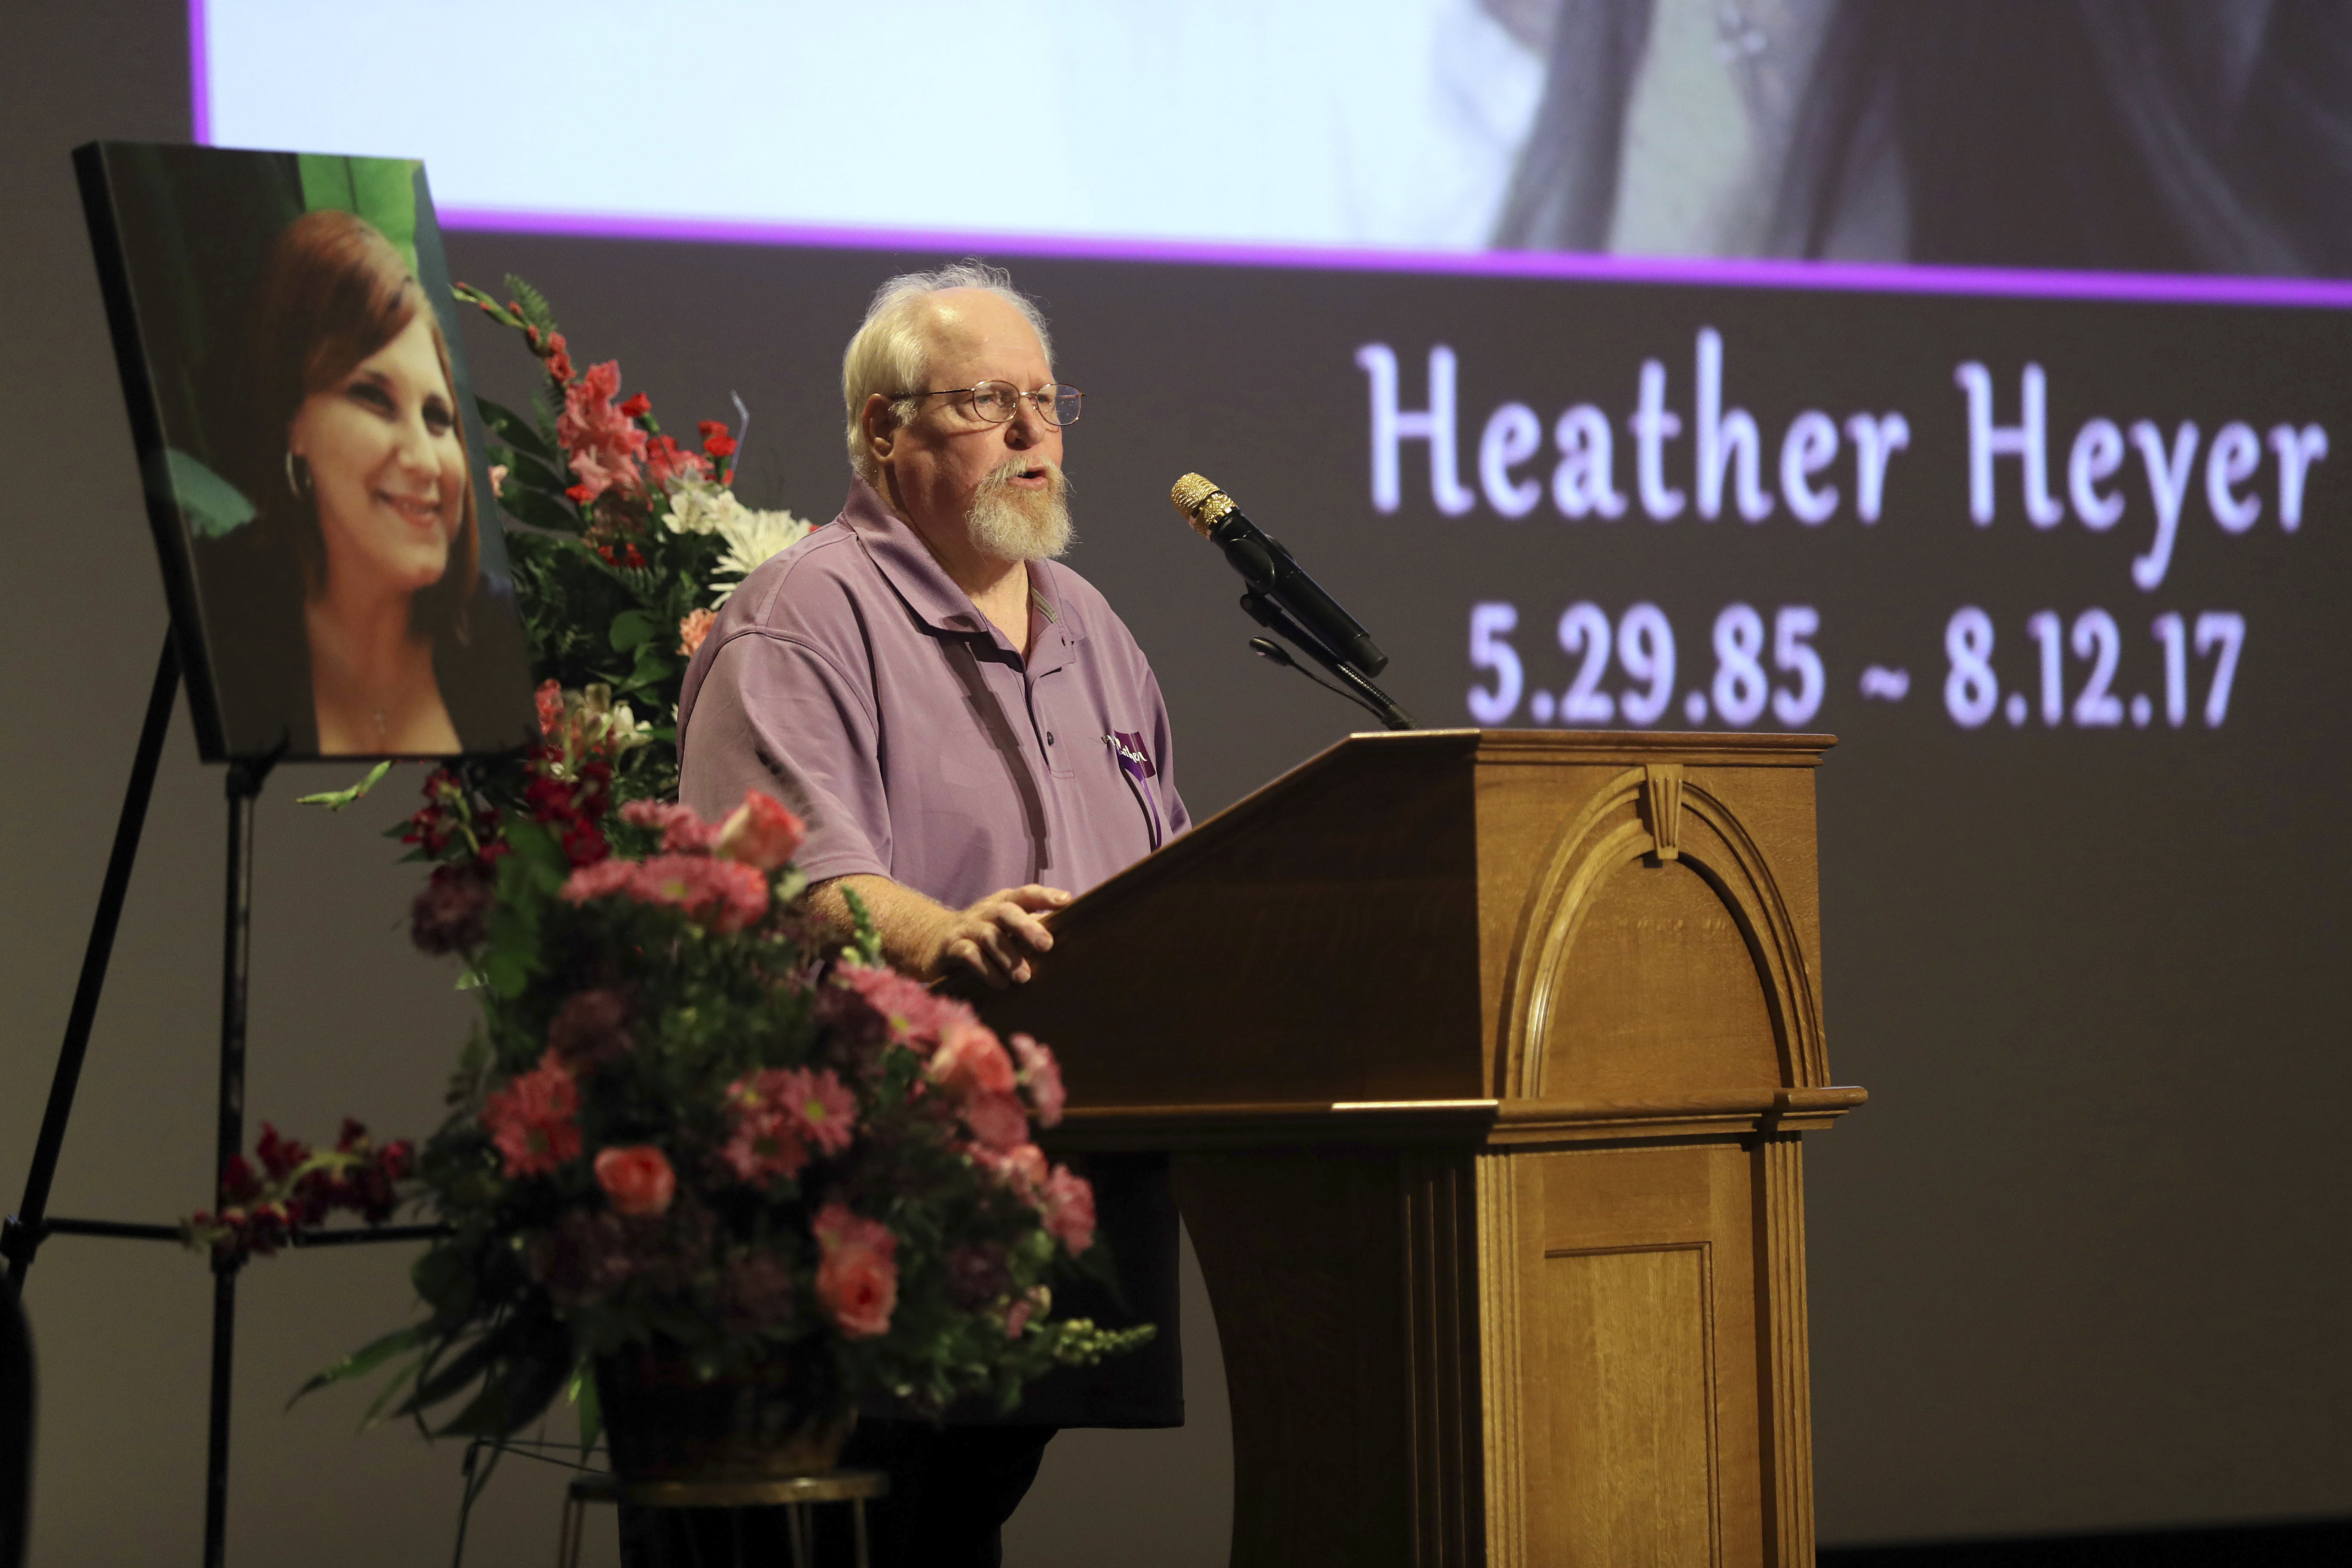 The father of Heather Heyer speaks at her memorial